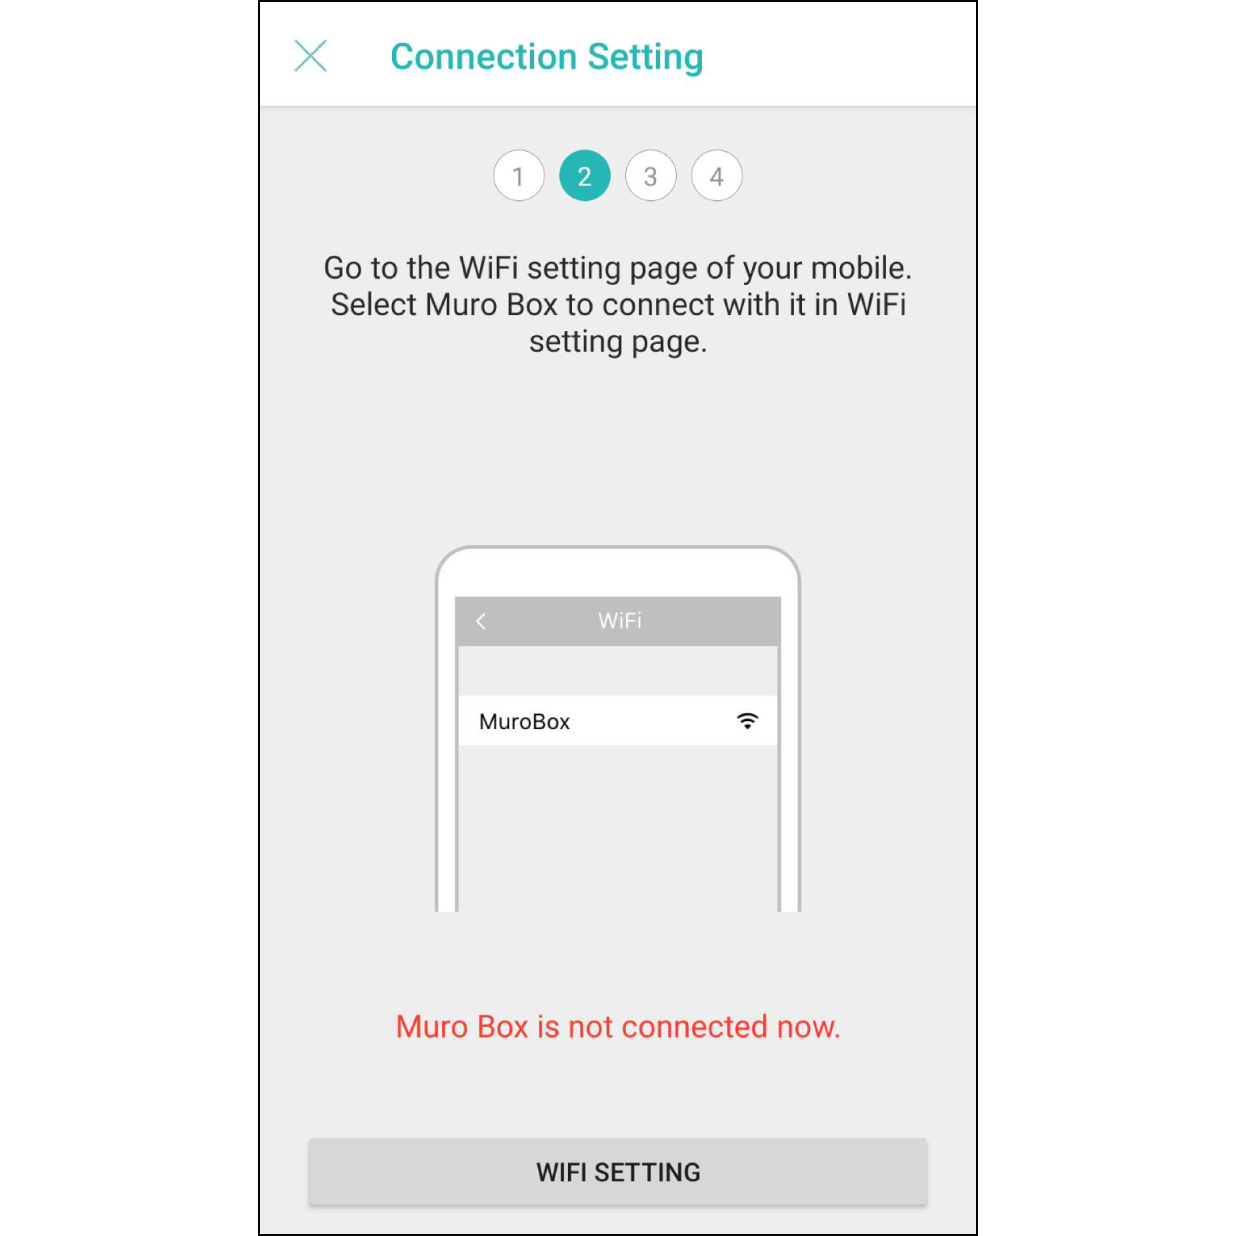 5. Connect the Muro Box with Wi-Fi. The latest Android-version phone connects to Wi-Fi automatically; the older version requires you to click on "Wi-Fi Setting" manually.